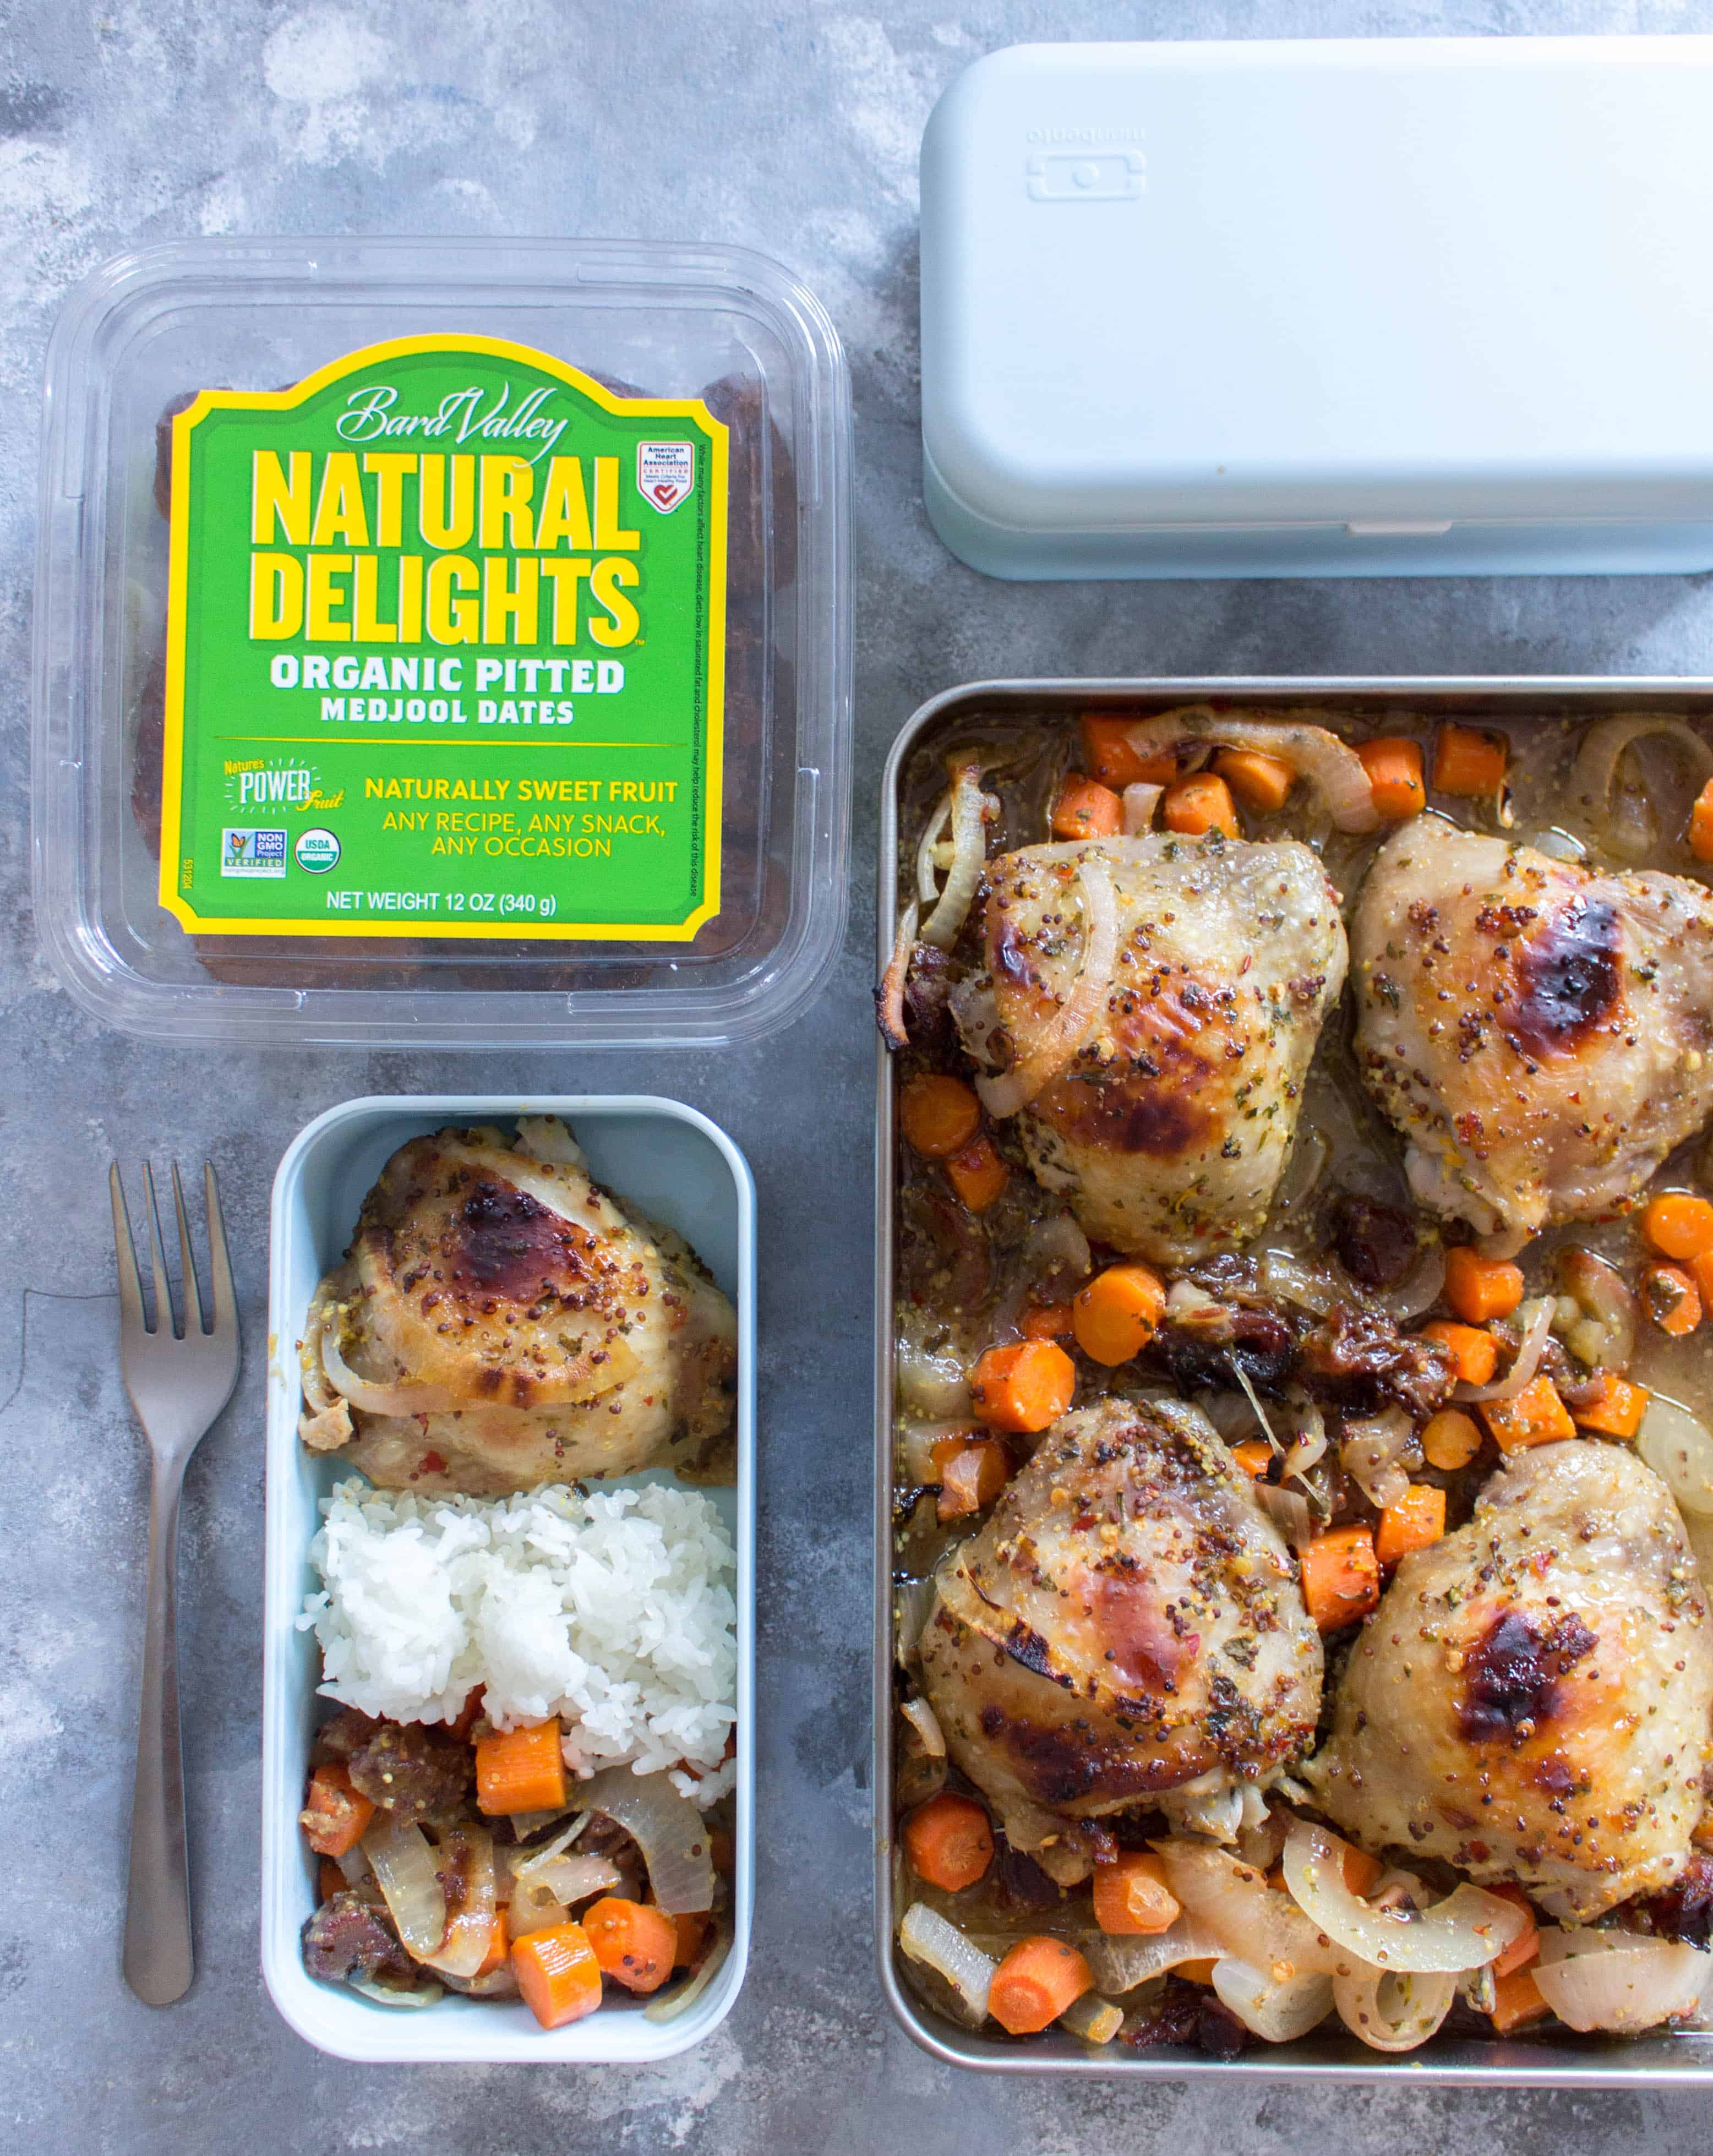 A delicious one sheet pan sweet and savory chicken meal prep that will have you looking forward to your packed lunch! #easylunchideas #easydinnerideas #onesheetpan #onepotmeals #chickenrecipes #chickenanddates